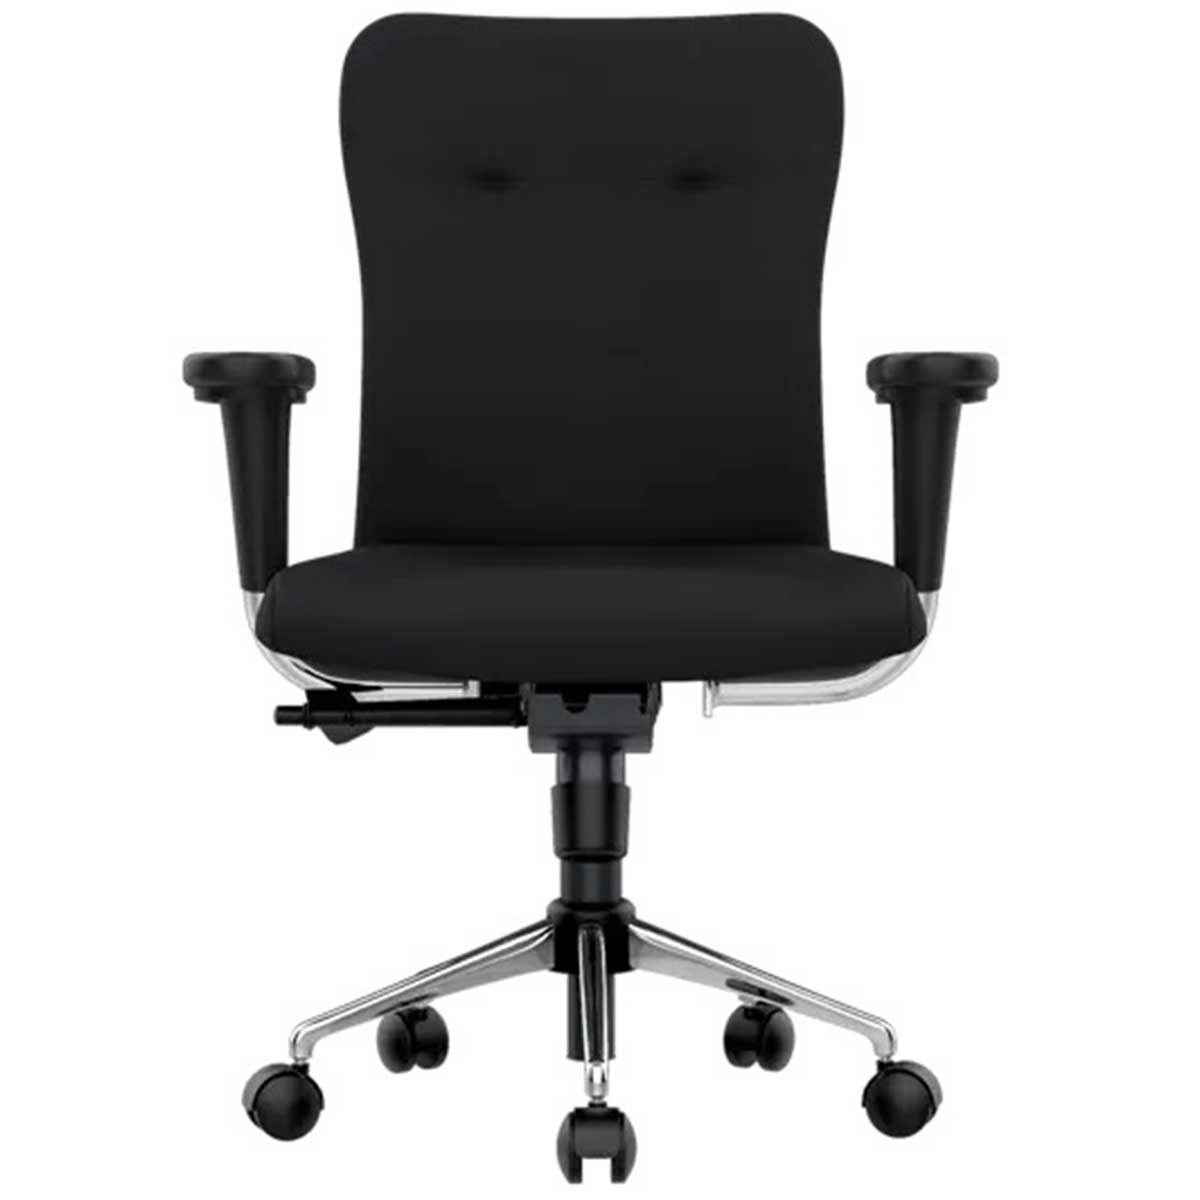 Fabric Office Chair Manufacturers, Suppliers in Nirman Vihar